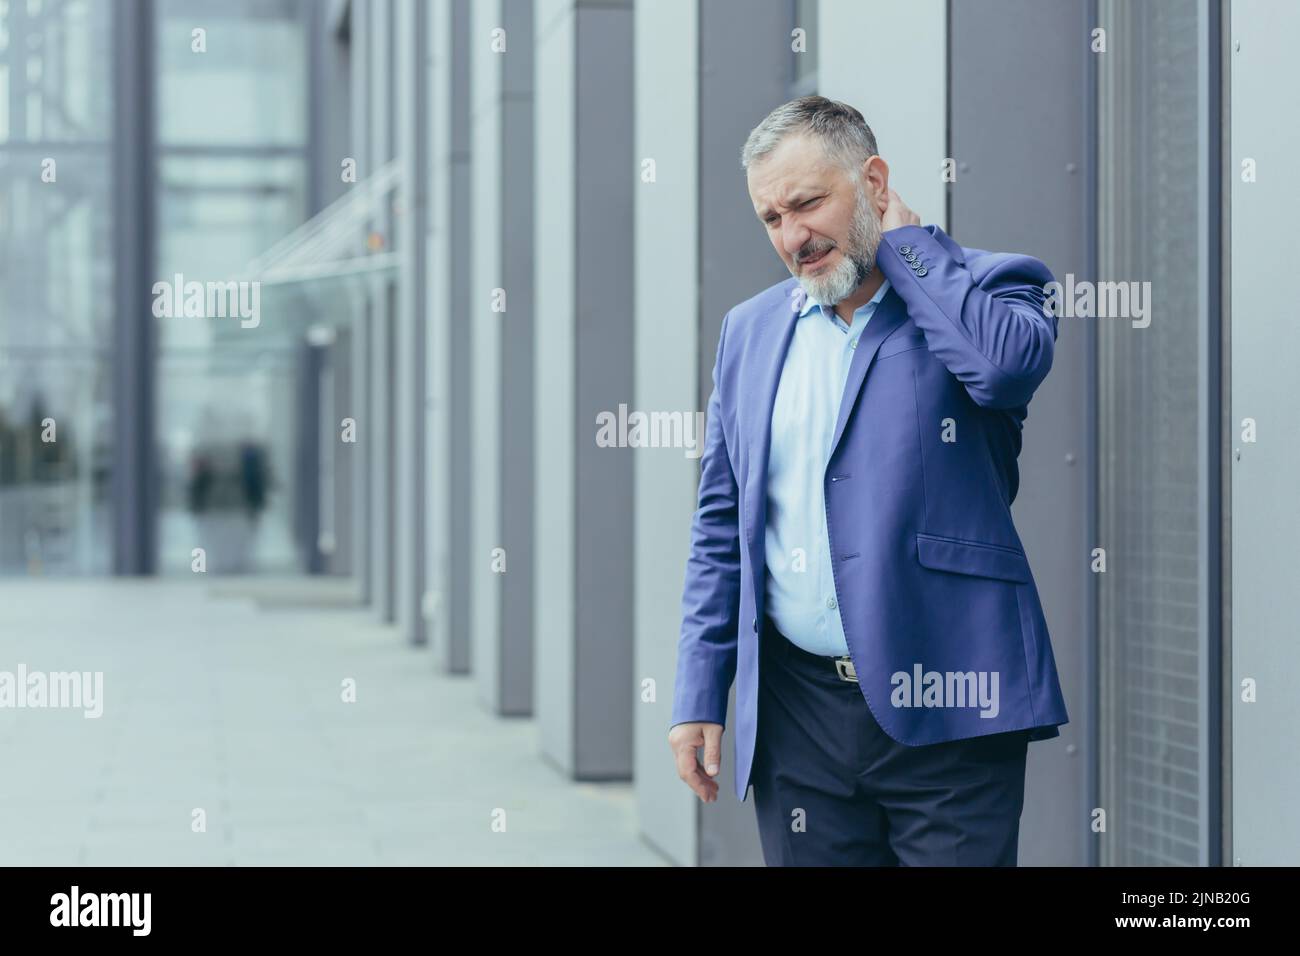 Injured and overtired senior gray-haired businessman, man outside office has severe neck pain, director holding hand massaging neck Stock Photo